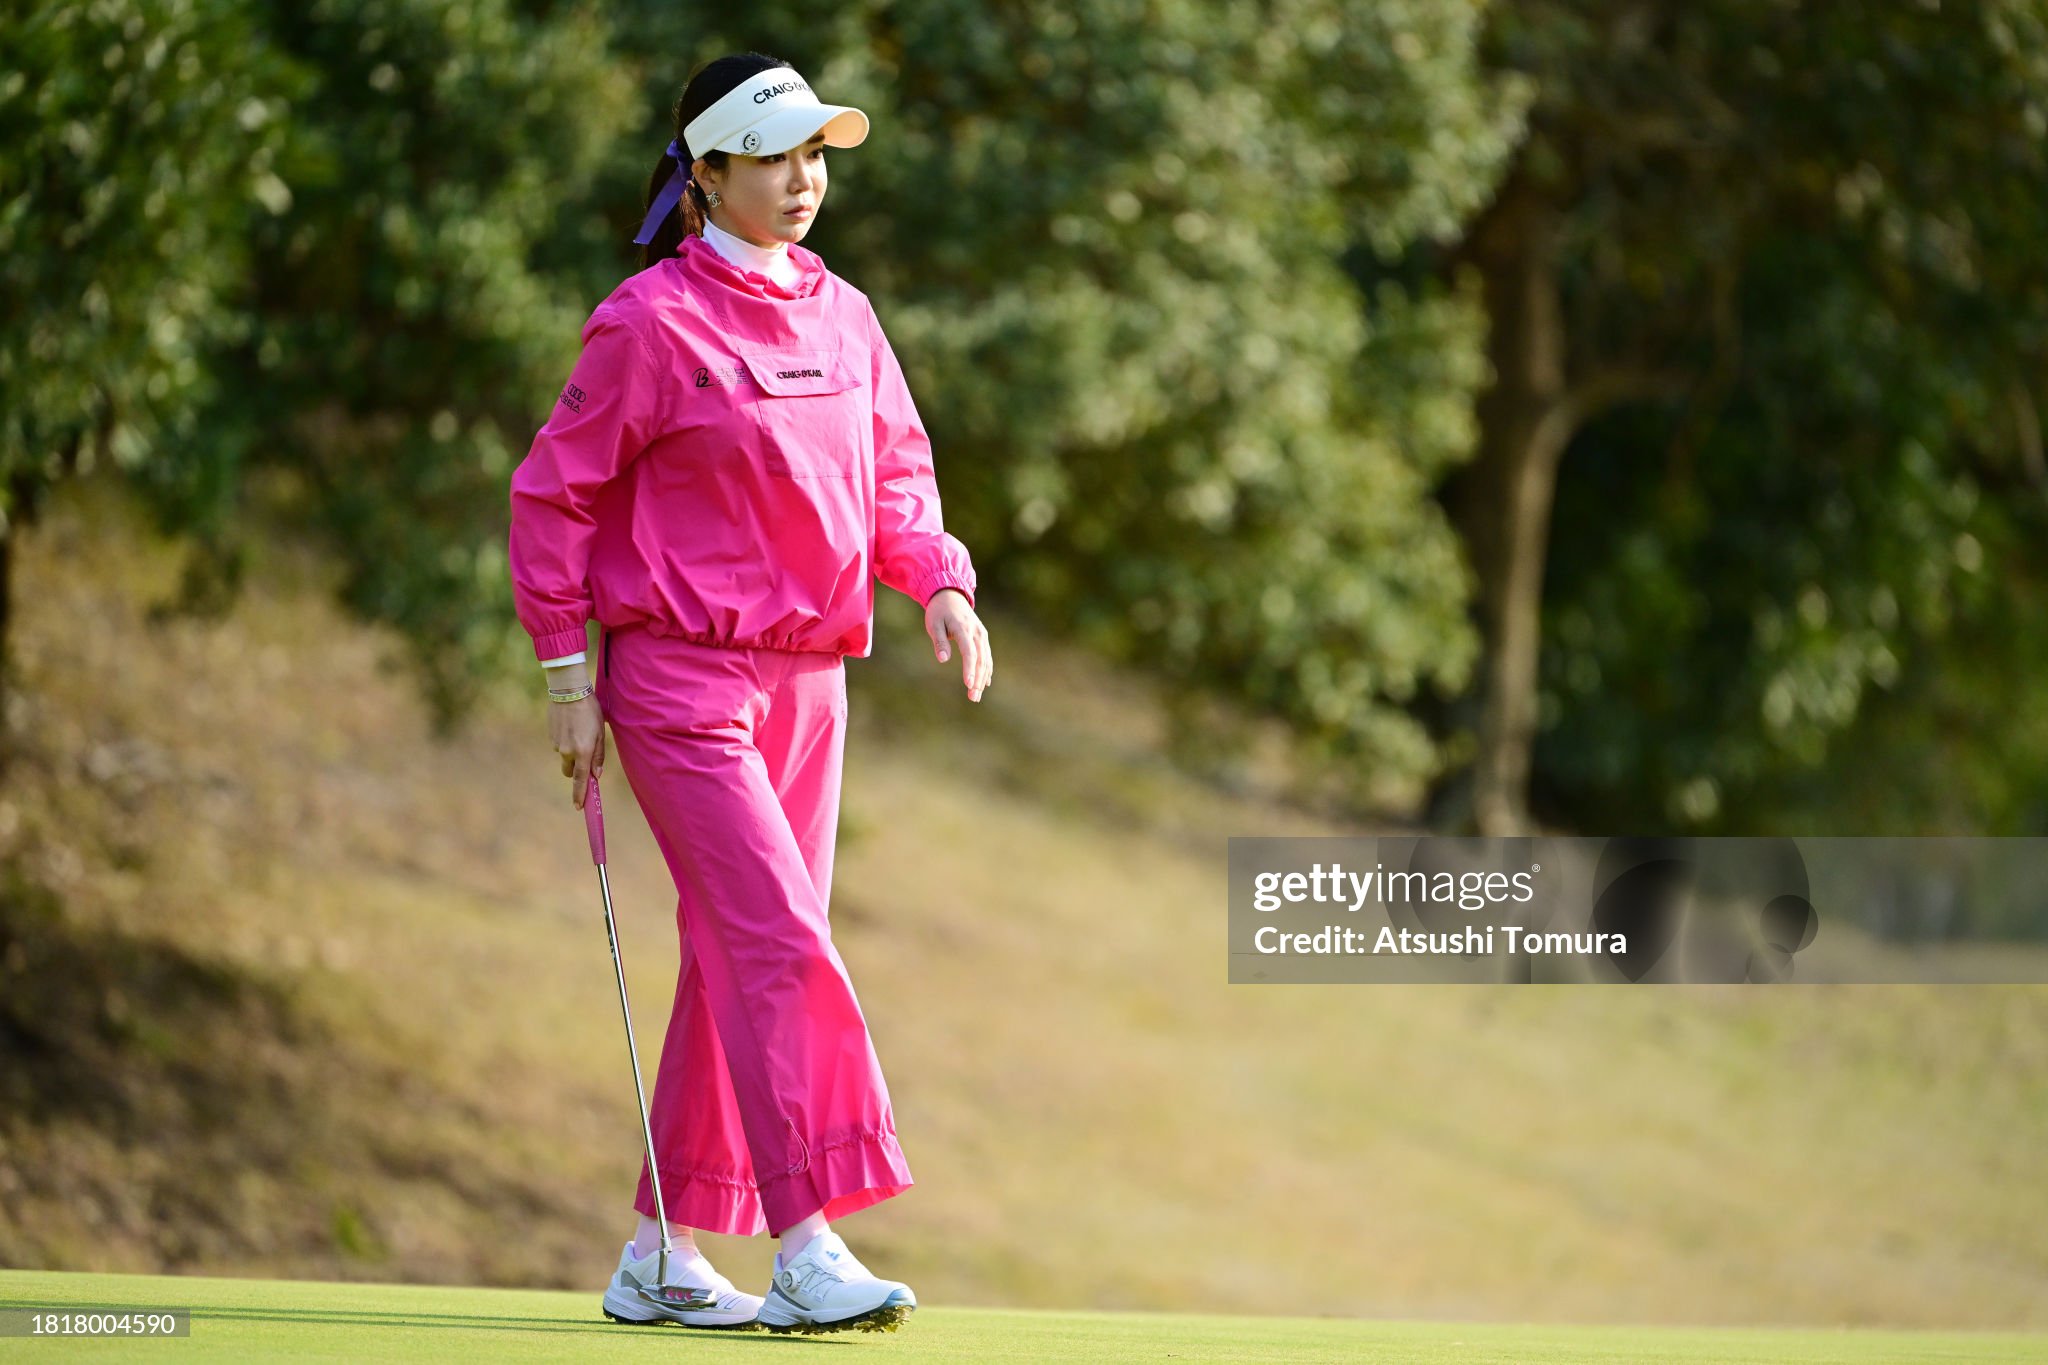 https://media.gettyimages.com/id/1818004590/photo/jlpga-qualifying-tournament-final-stage-round-one.jpg?s=2048x2048&w=gi&k=20&c=0bqYsgRP87ASK-nrYd3iqx0M3_H5cm-SIUMgj6t2s5I=